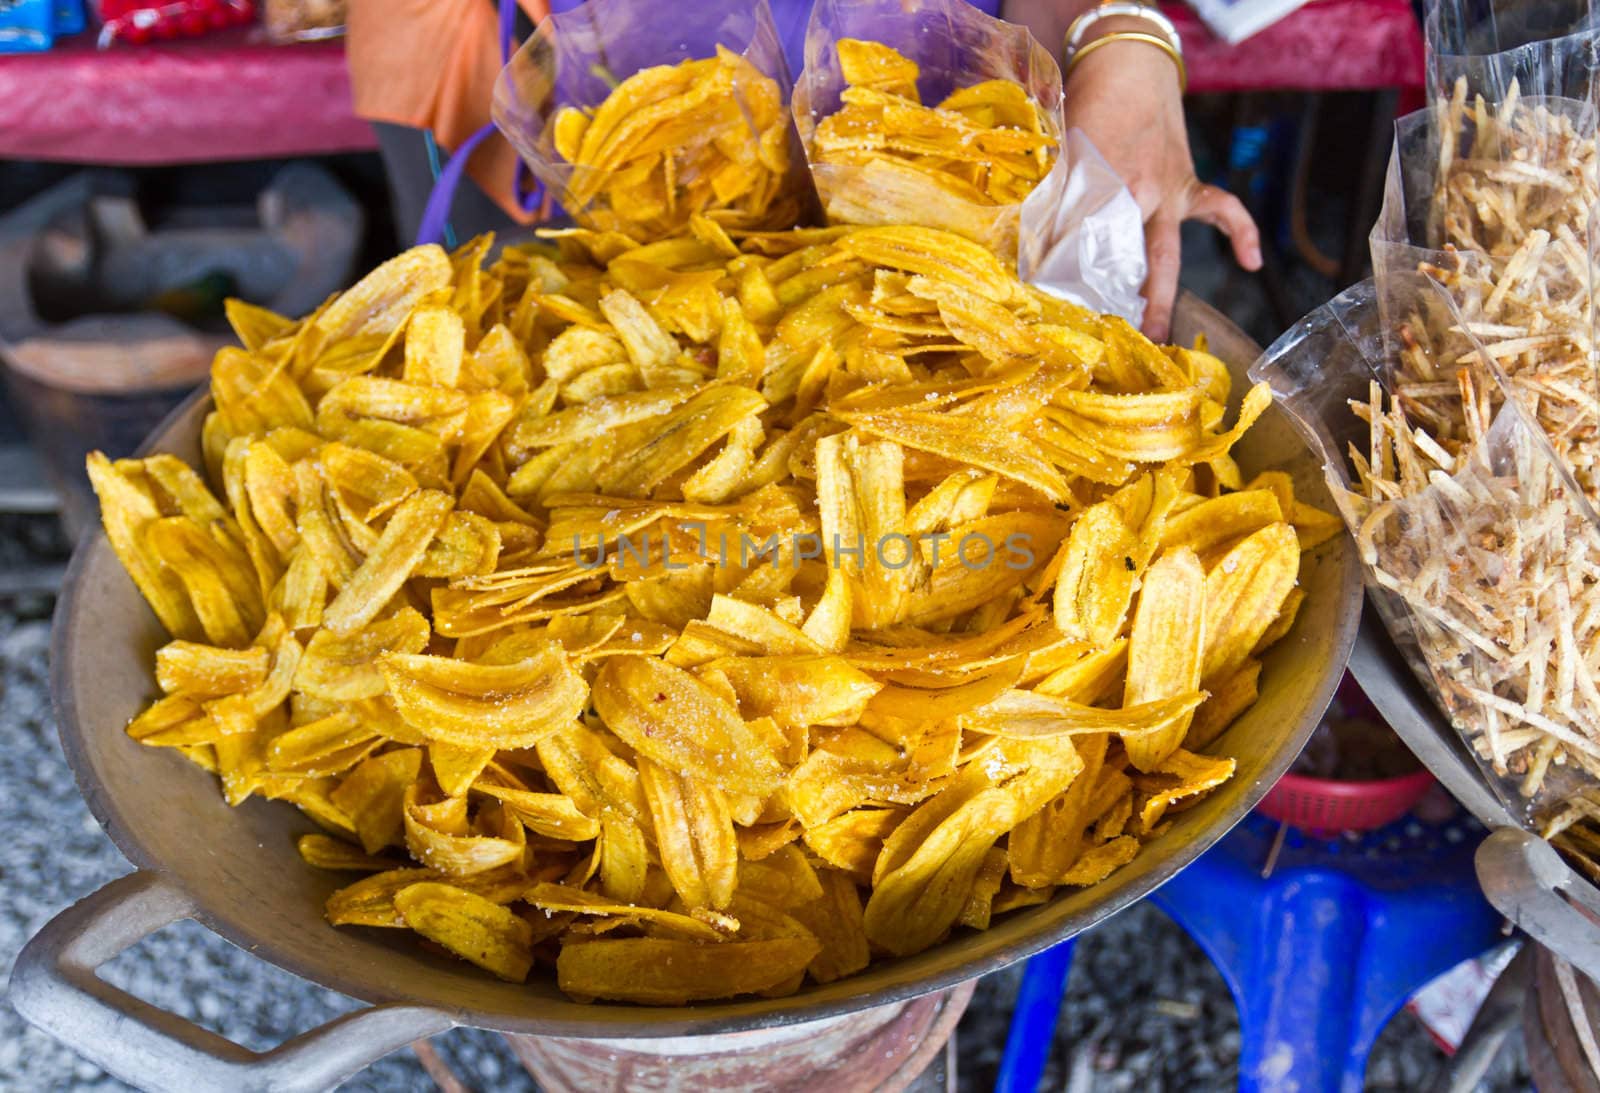 Banana chip for sale in the market